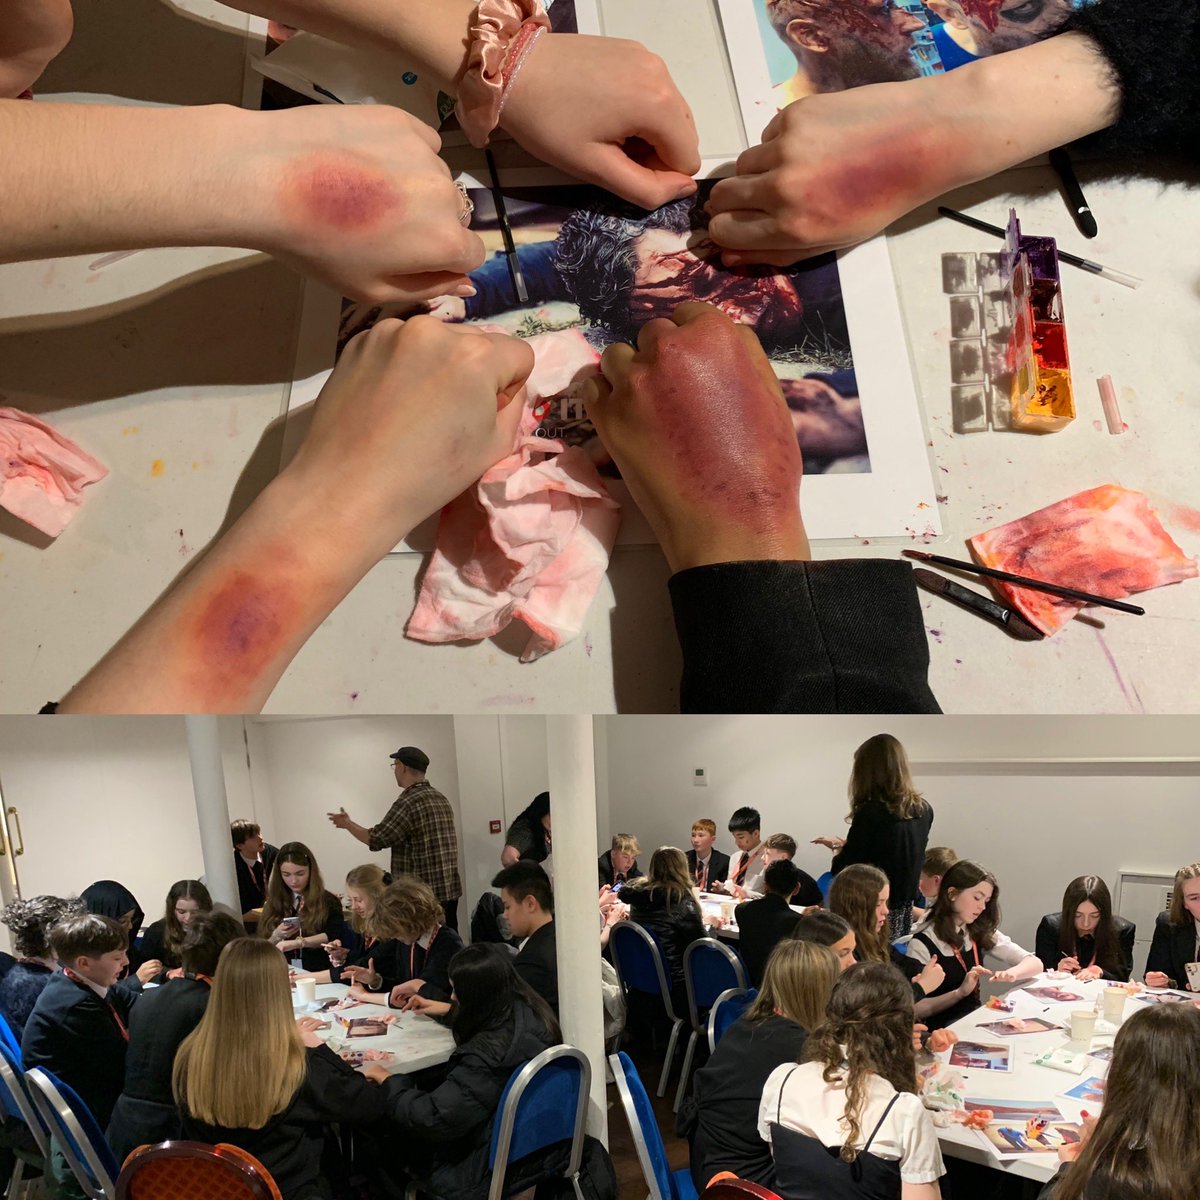 Thank you @BearsdenEnglish for letting me join you on a fabulous trip to Trade Halls Glasgow for #BBCYRFEST24 #BBCYoungReporter #creativeindustries #dyw #lifeskills #opportunities great time had by all filming Voxpox and SFX make up workshops